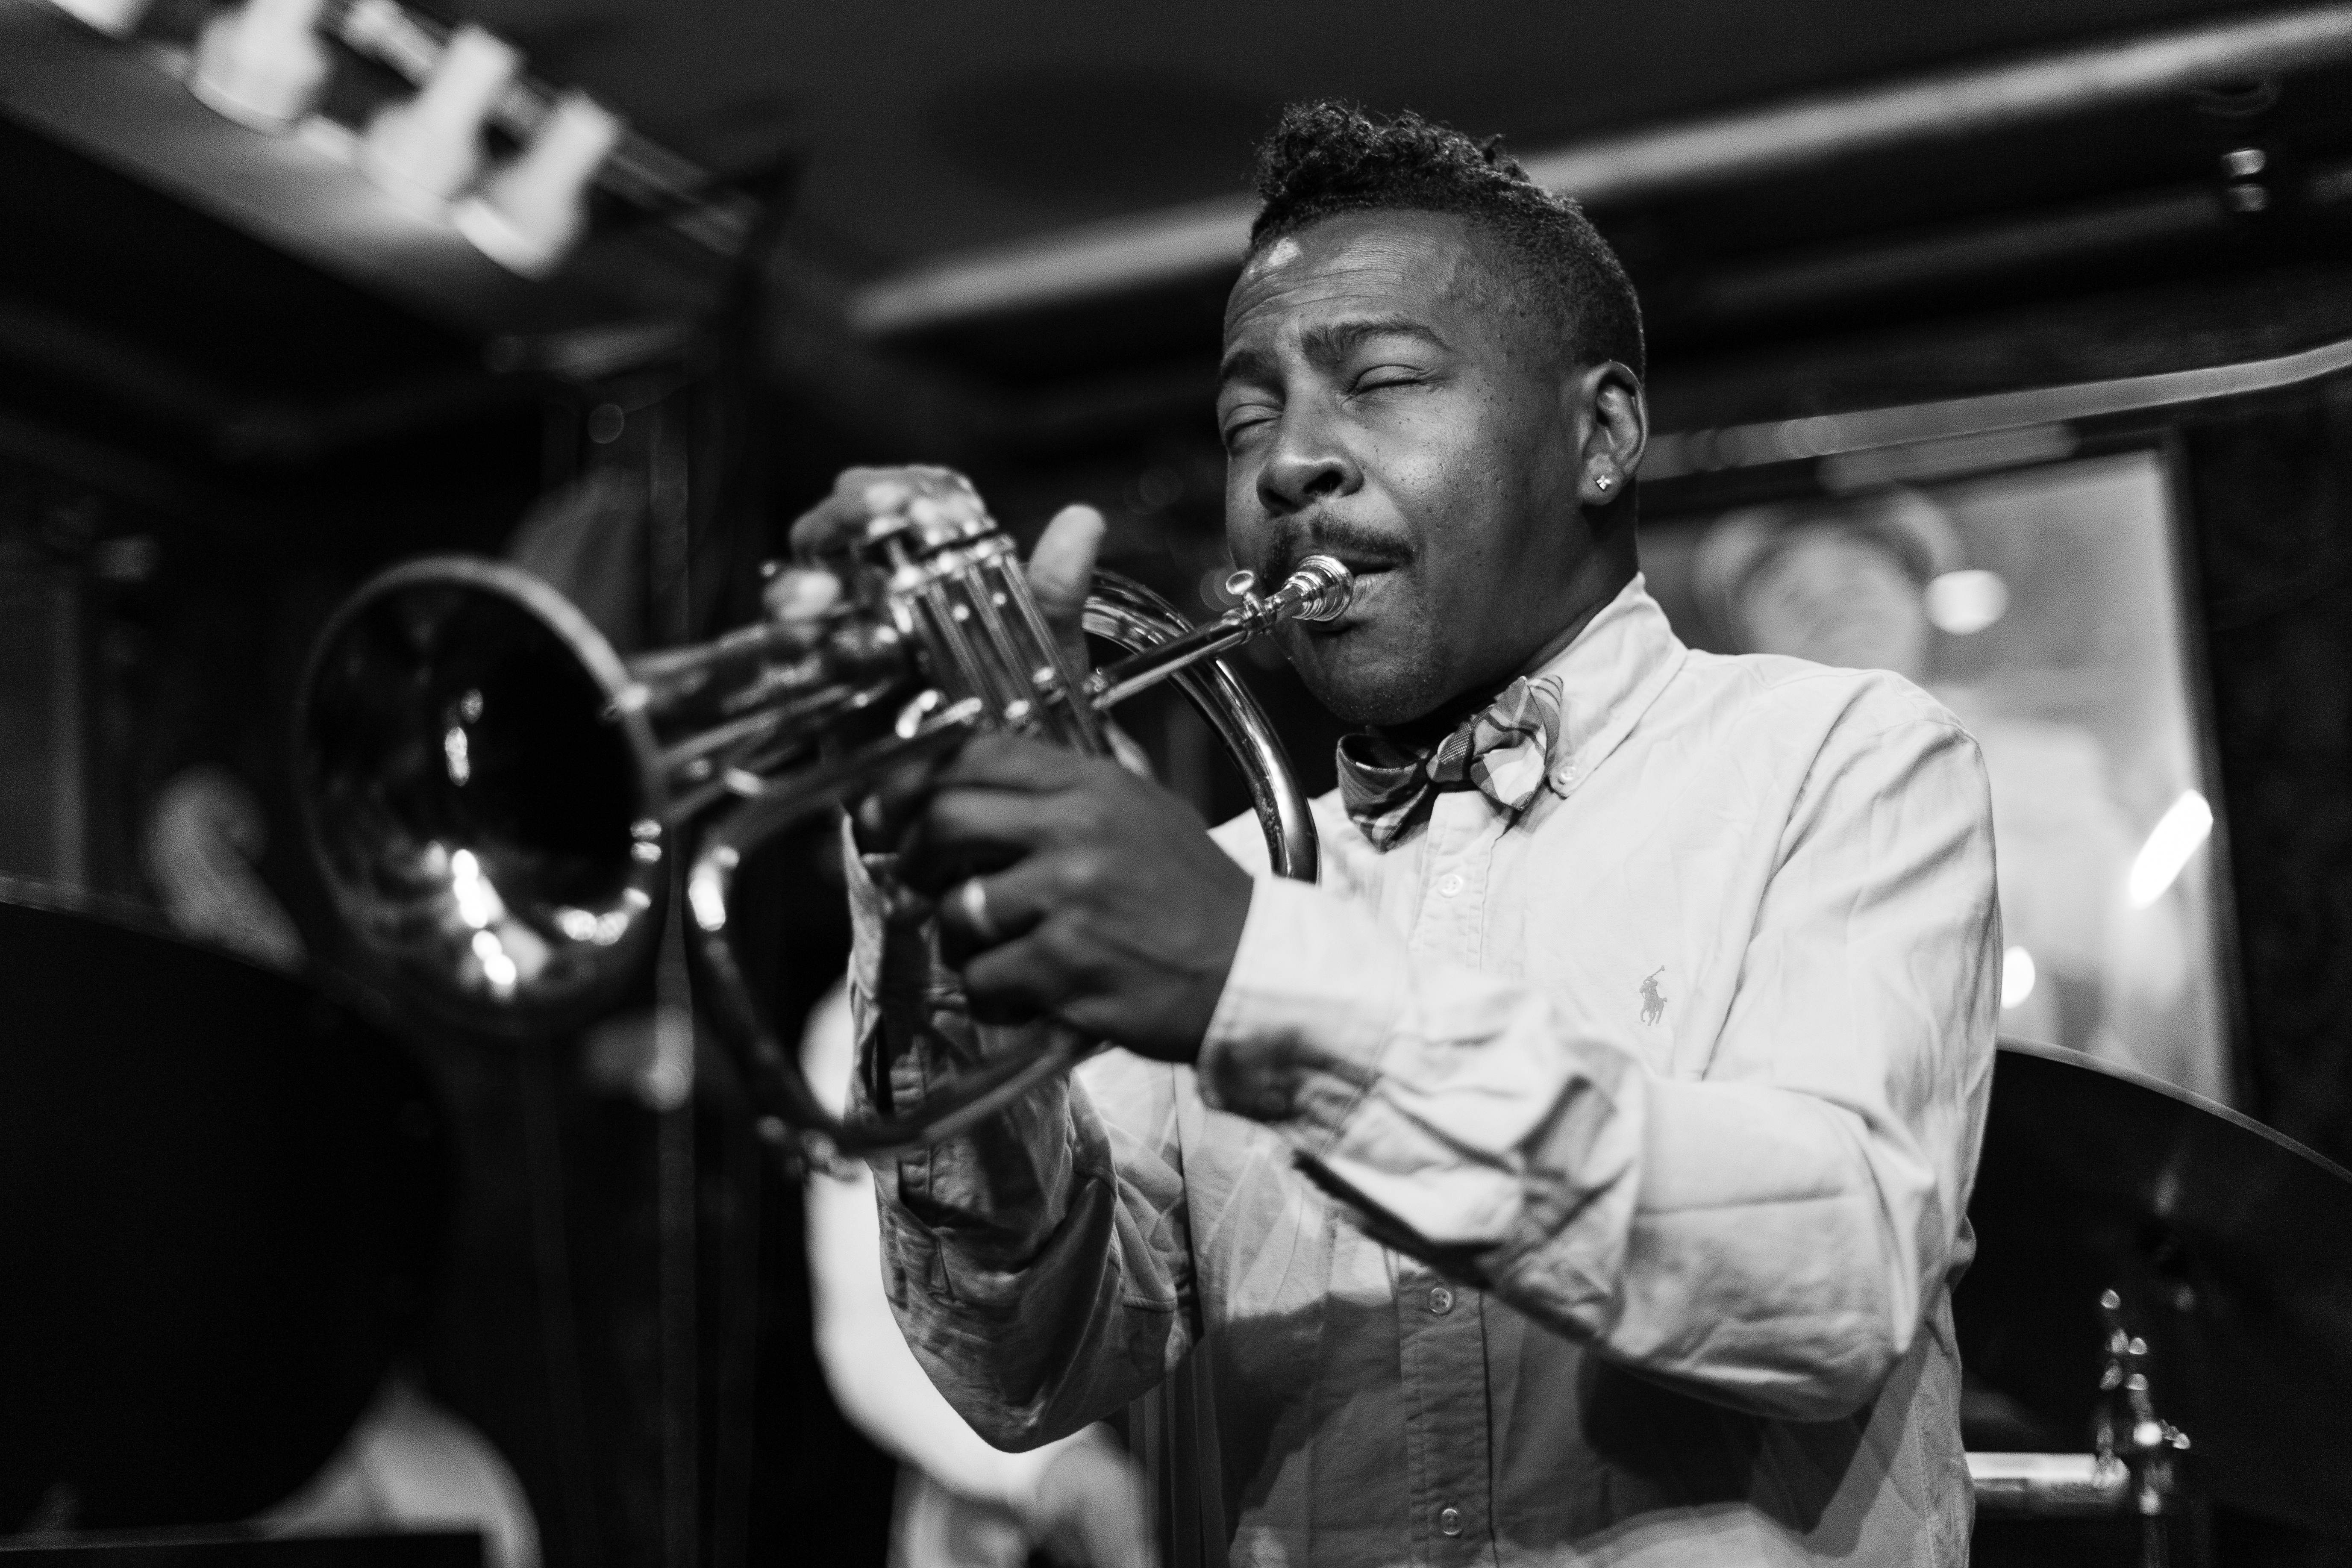 Roy Hargrove, wearing a shirt and bow tie, plays the trumpet